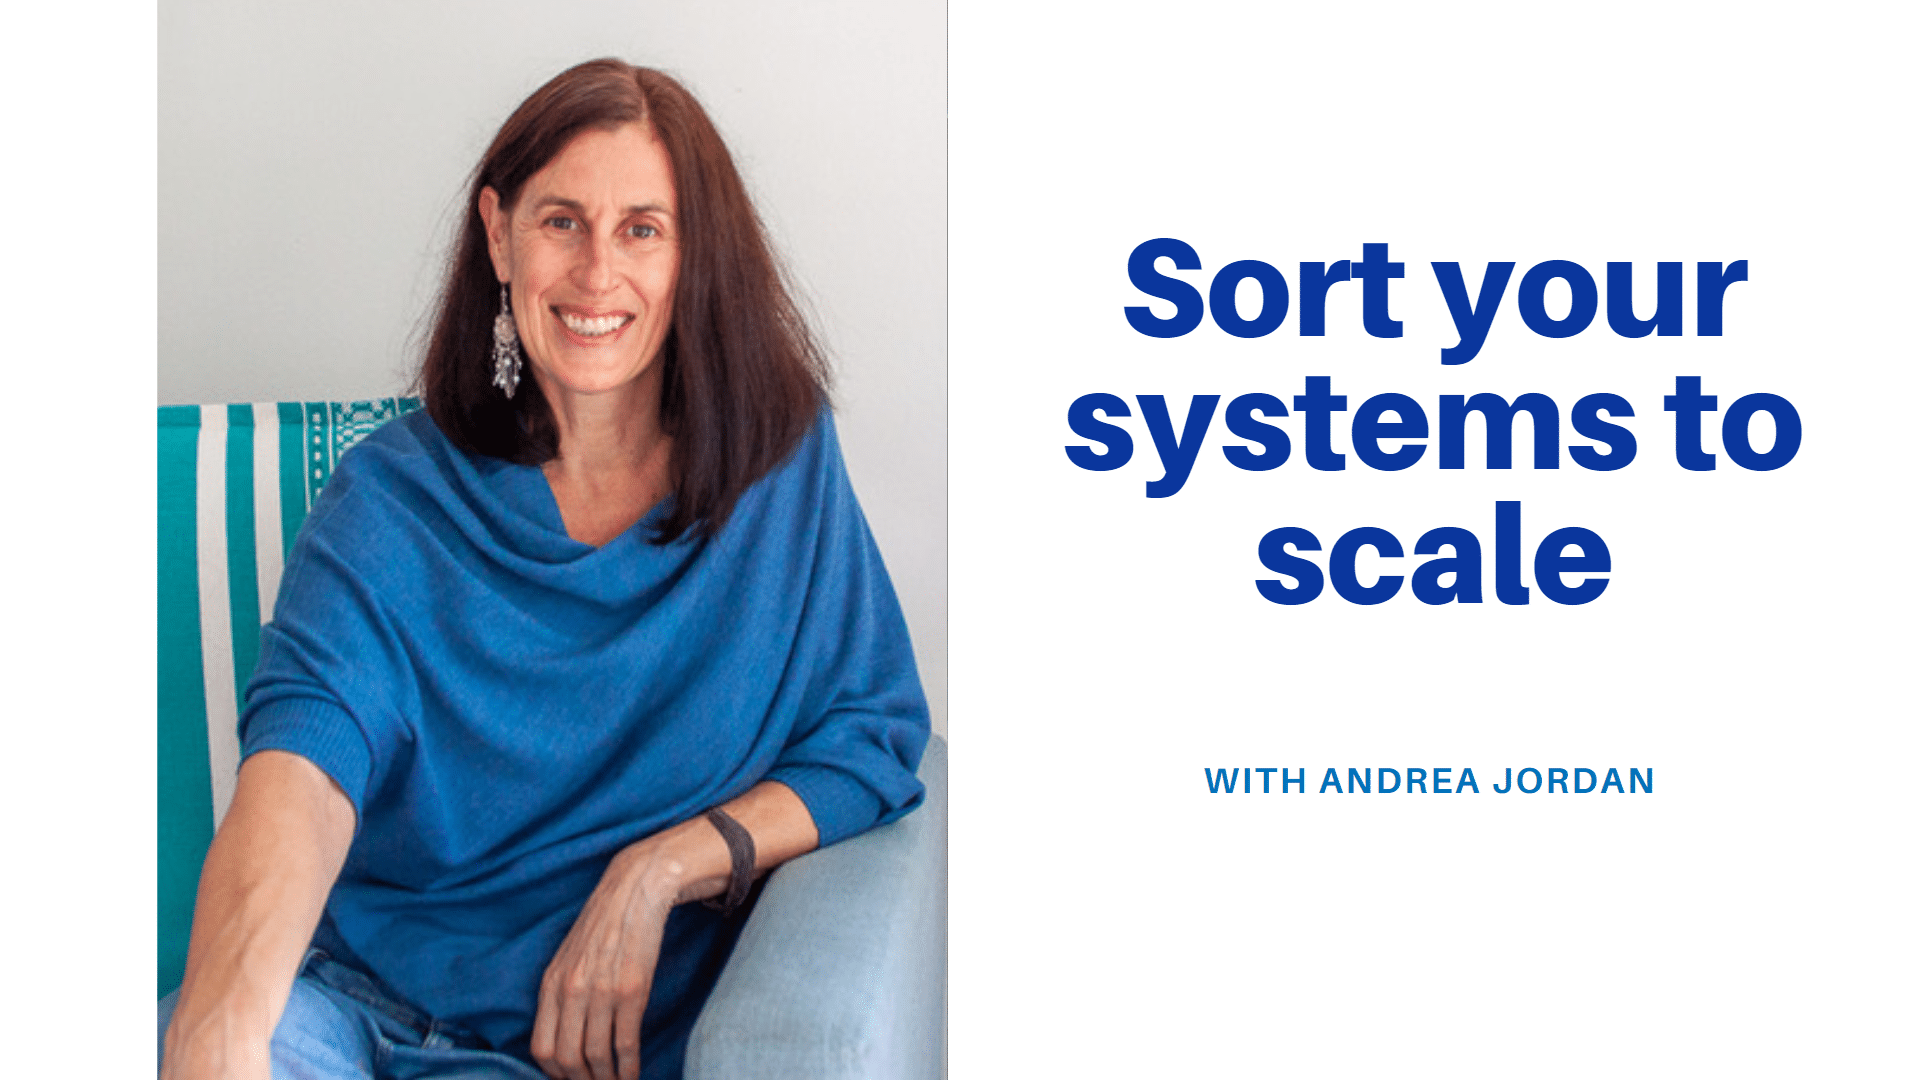 Sort your systems